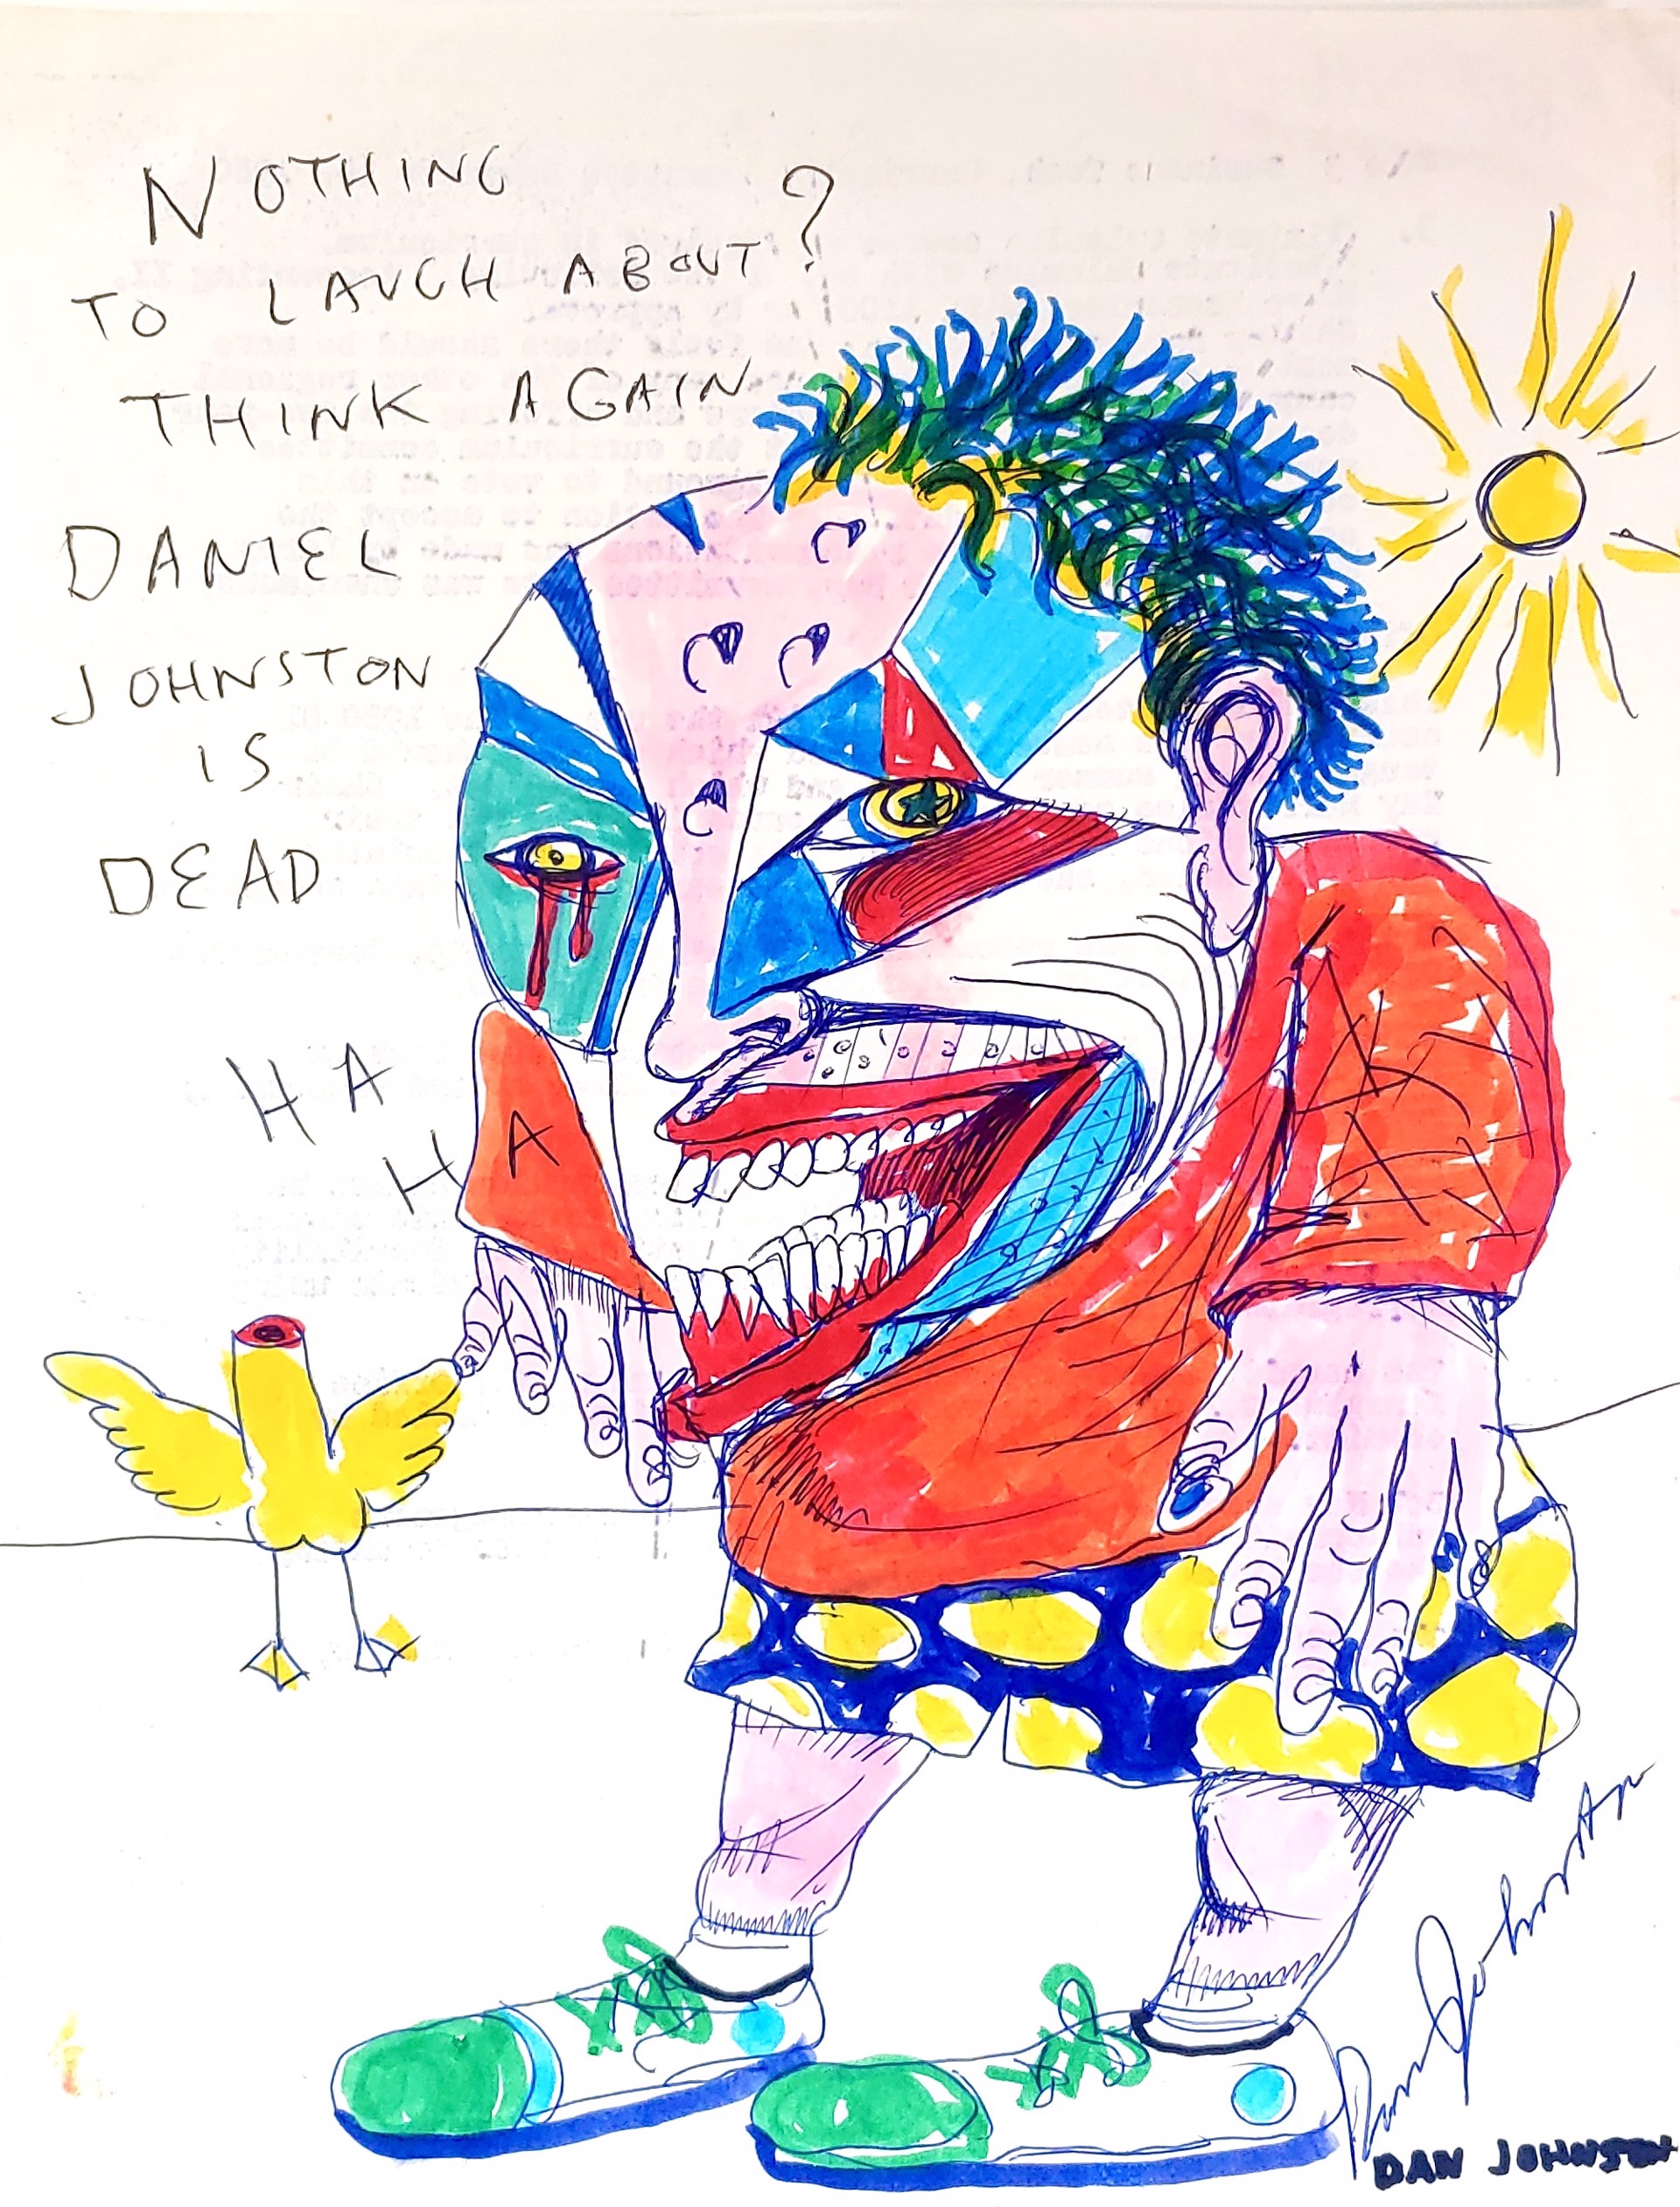 Nothing To Laugh About by Daniel Johnston